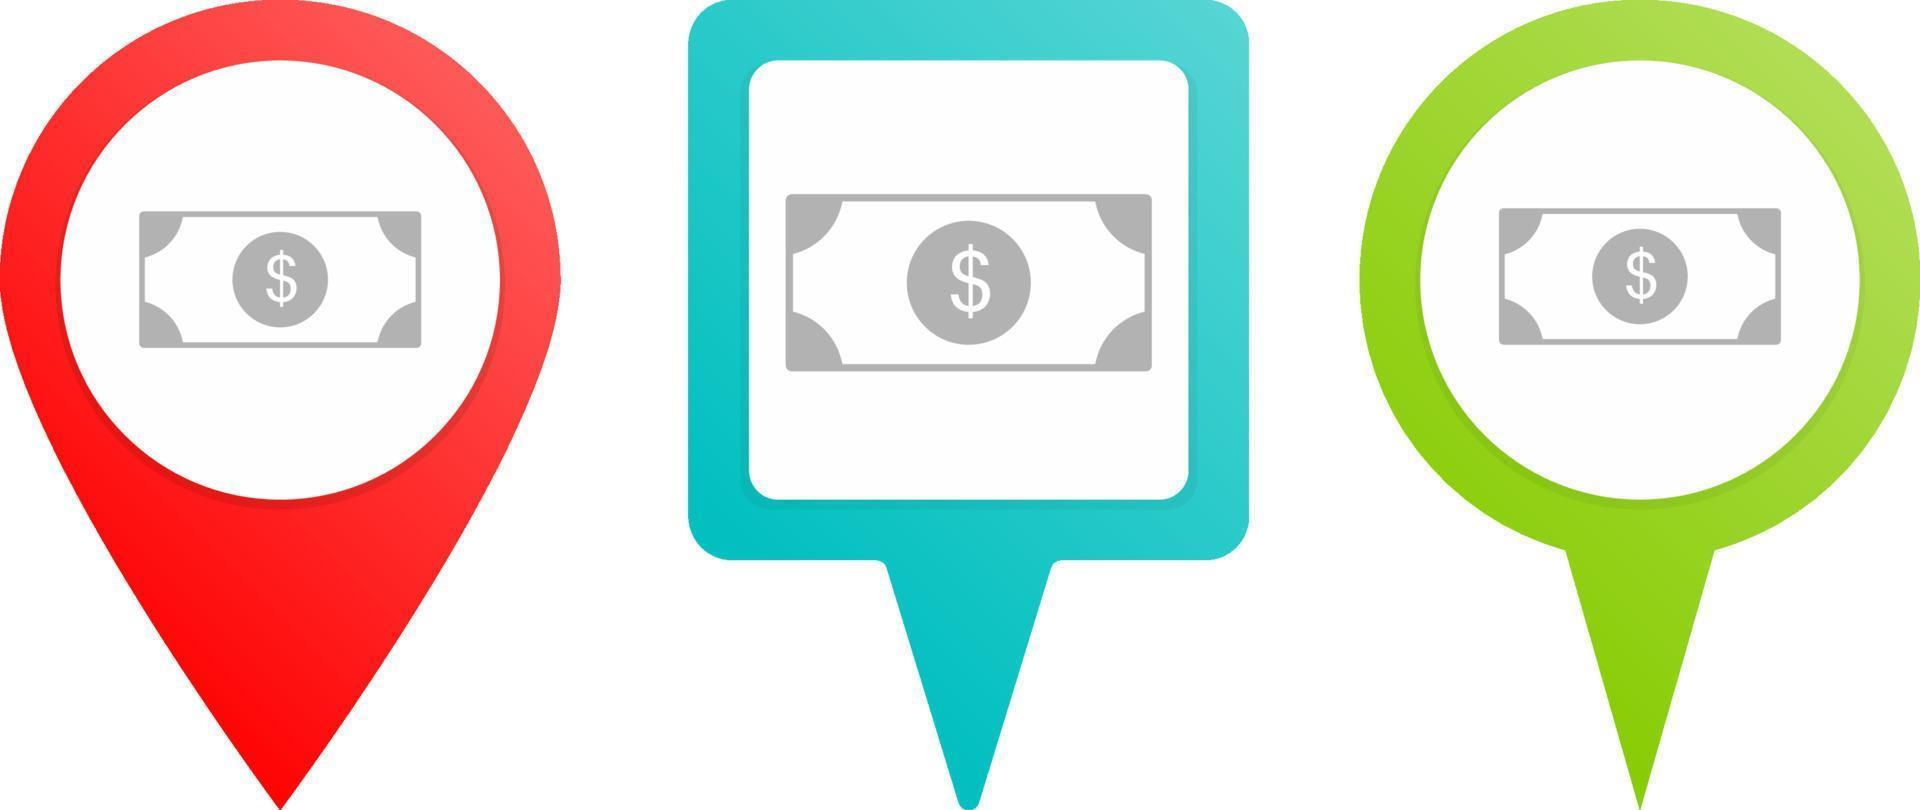 Dollar pin icon. Multicolor pin vector icon, diferent type map and navigation point.